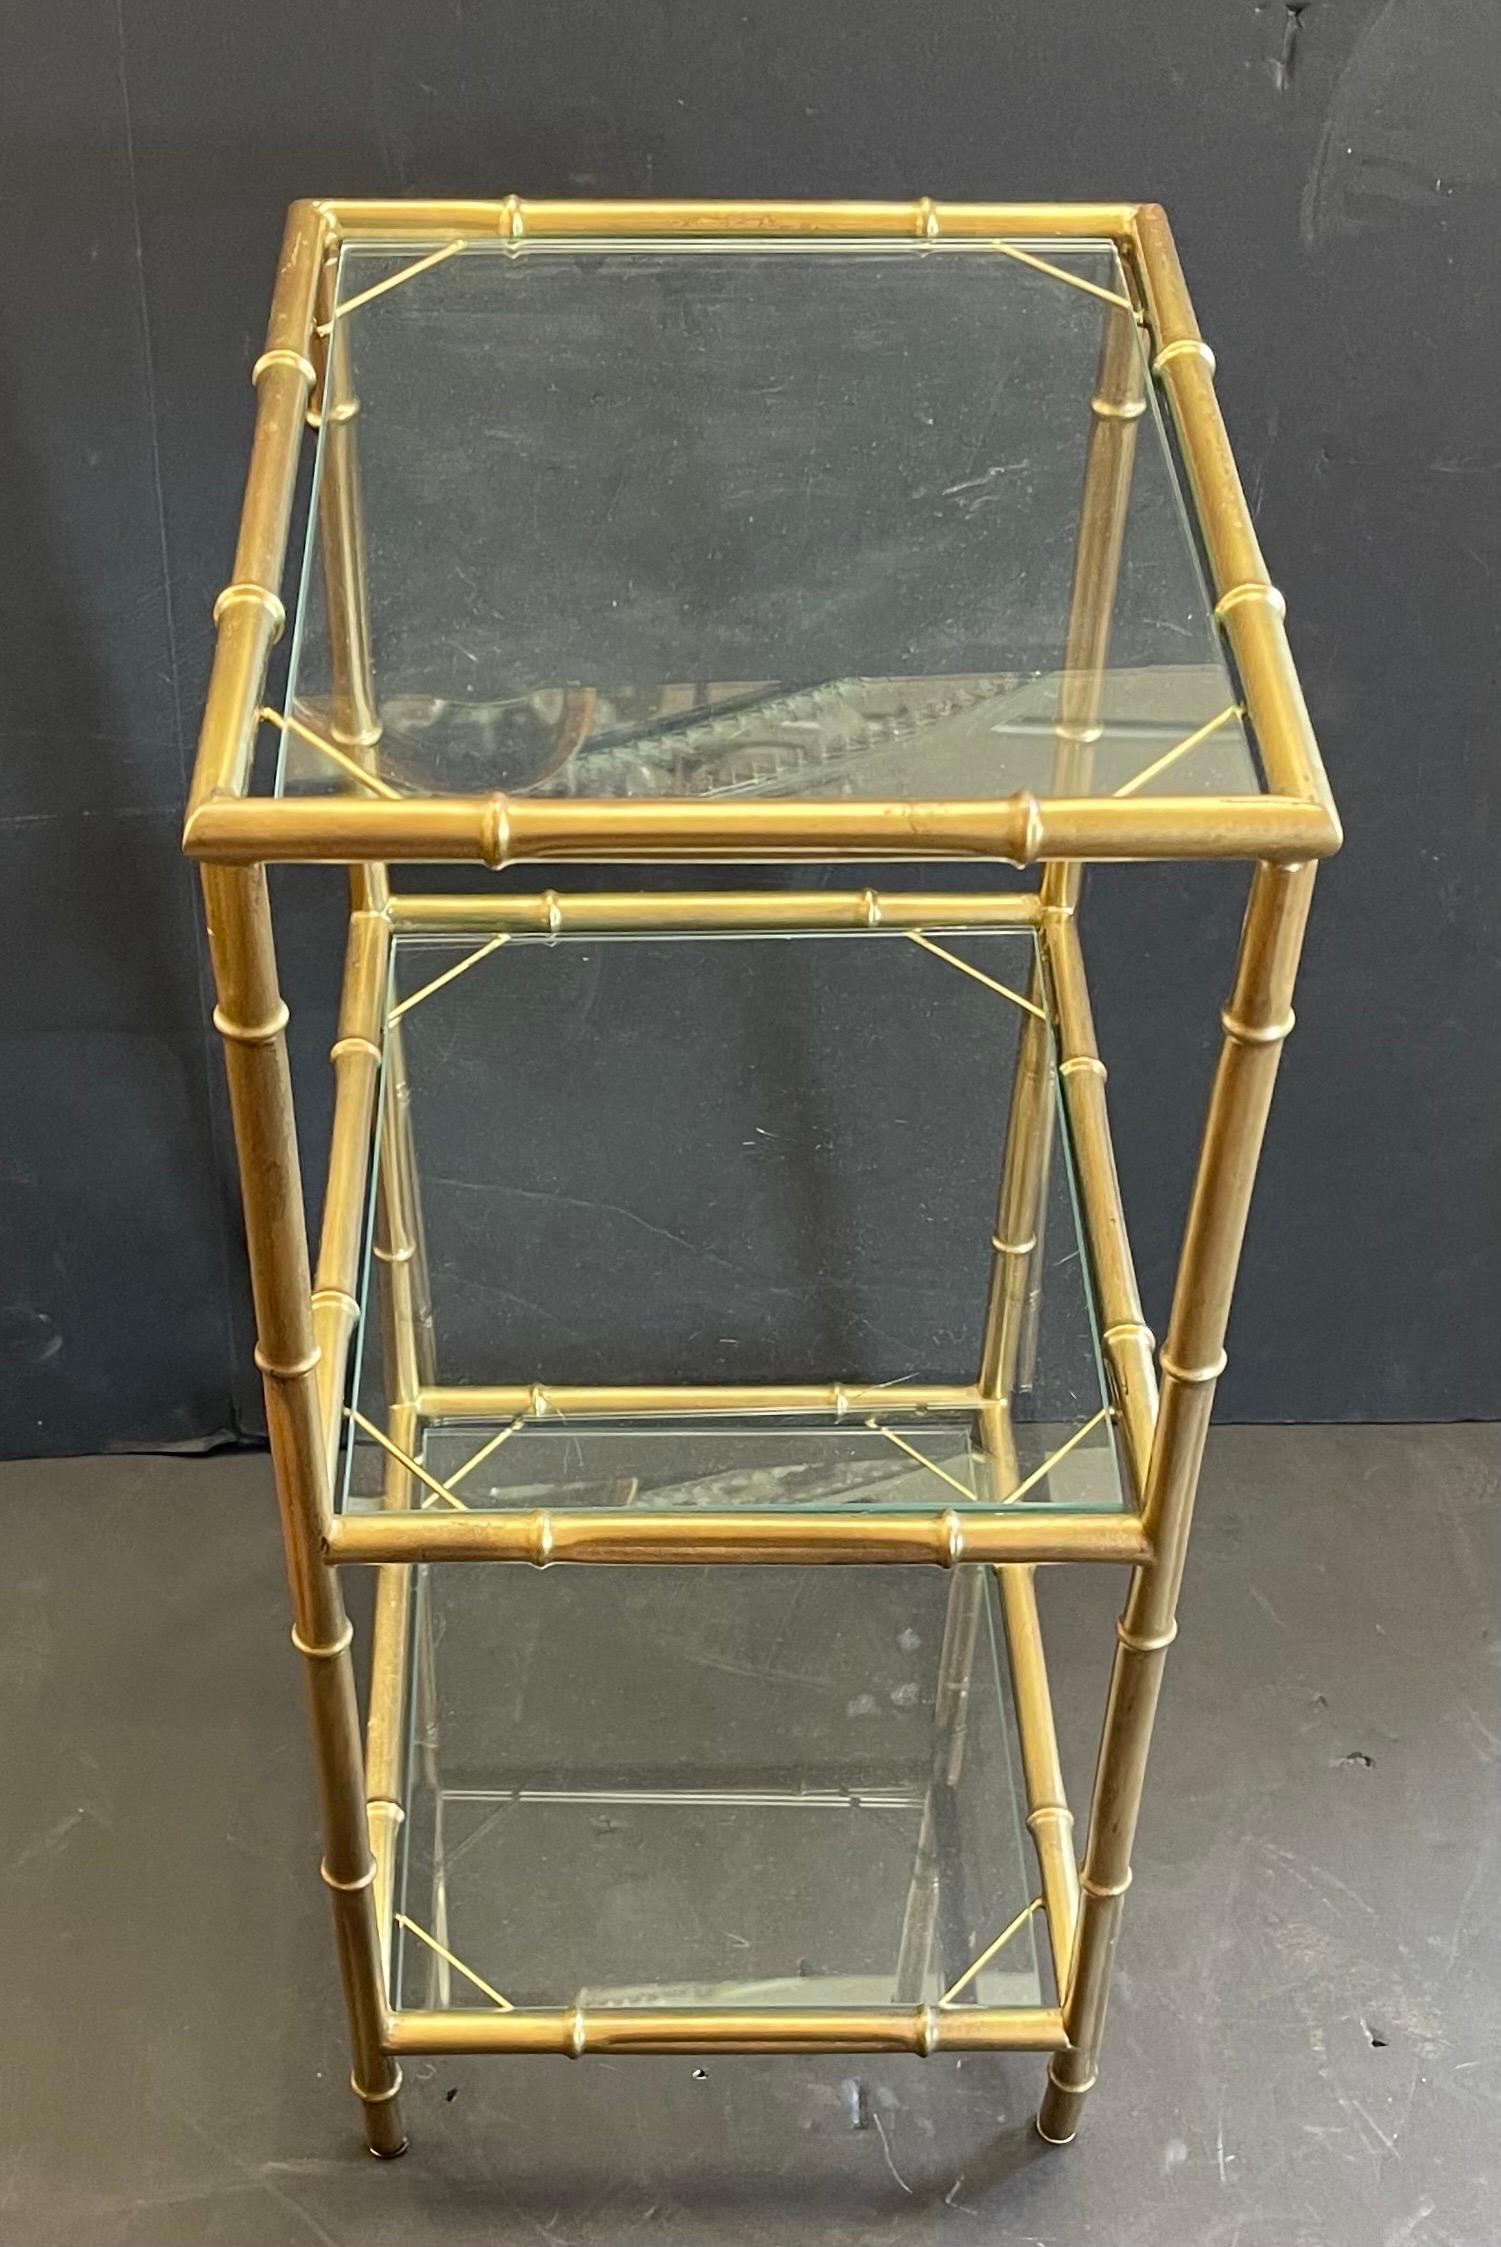 A Wonderful French Style Gold Gilt Bamboo Form Glass Three-Tier Bar Drink, Side, End Table.